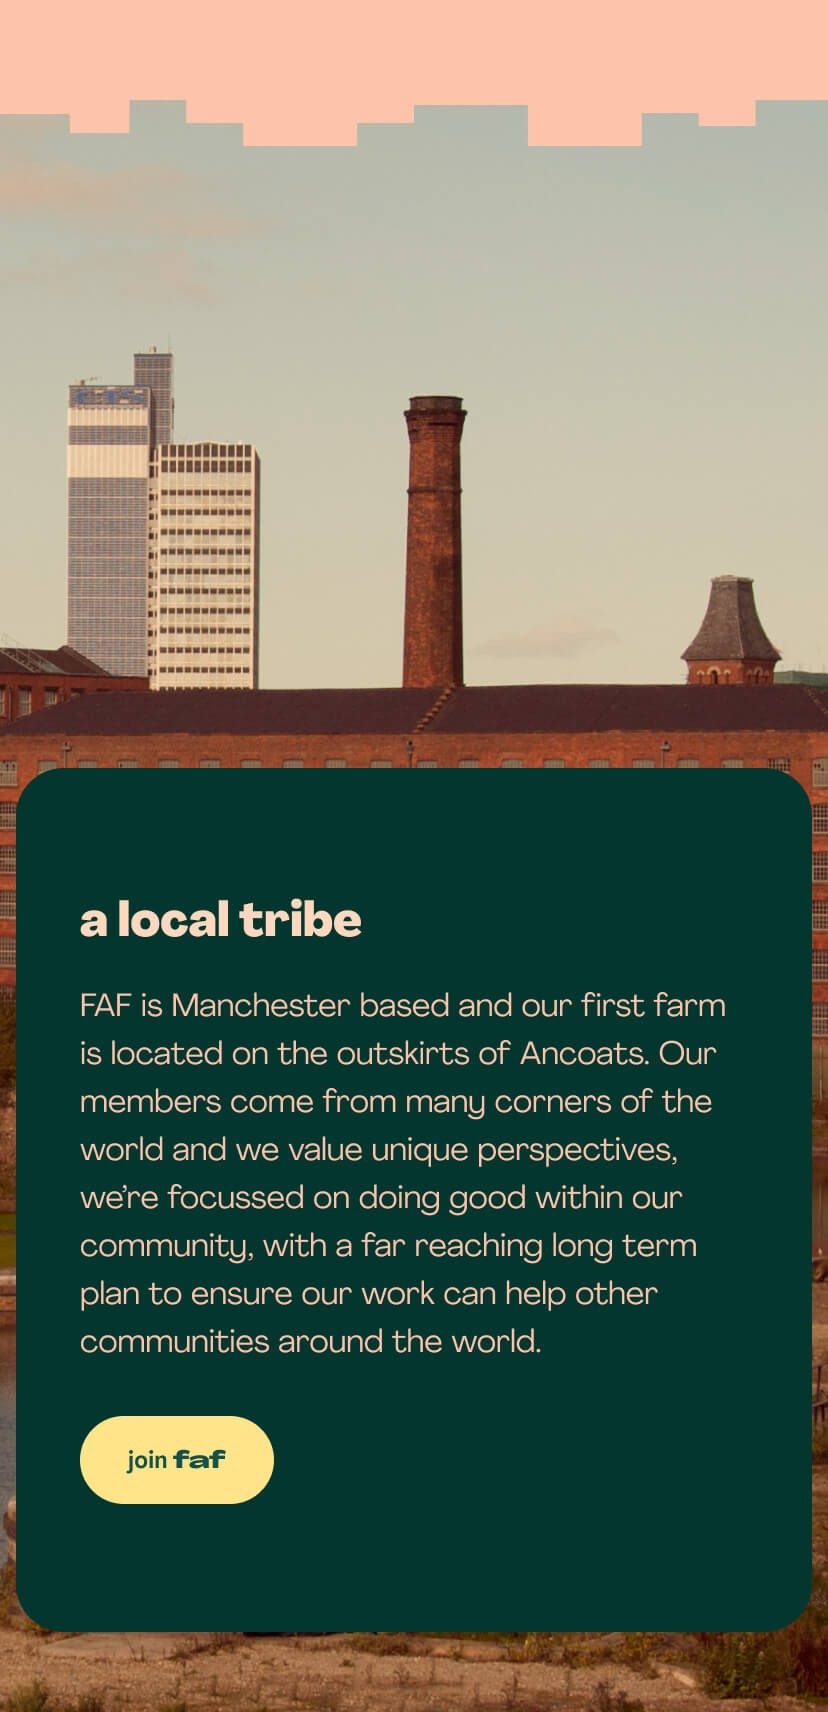 Mobile: a local tribe with photography of the Ancoats area.